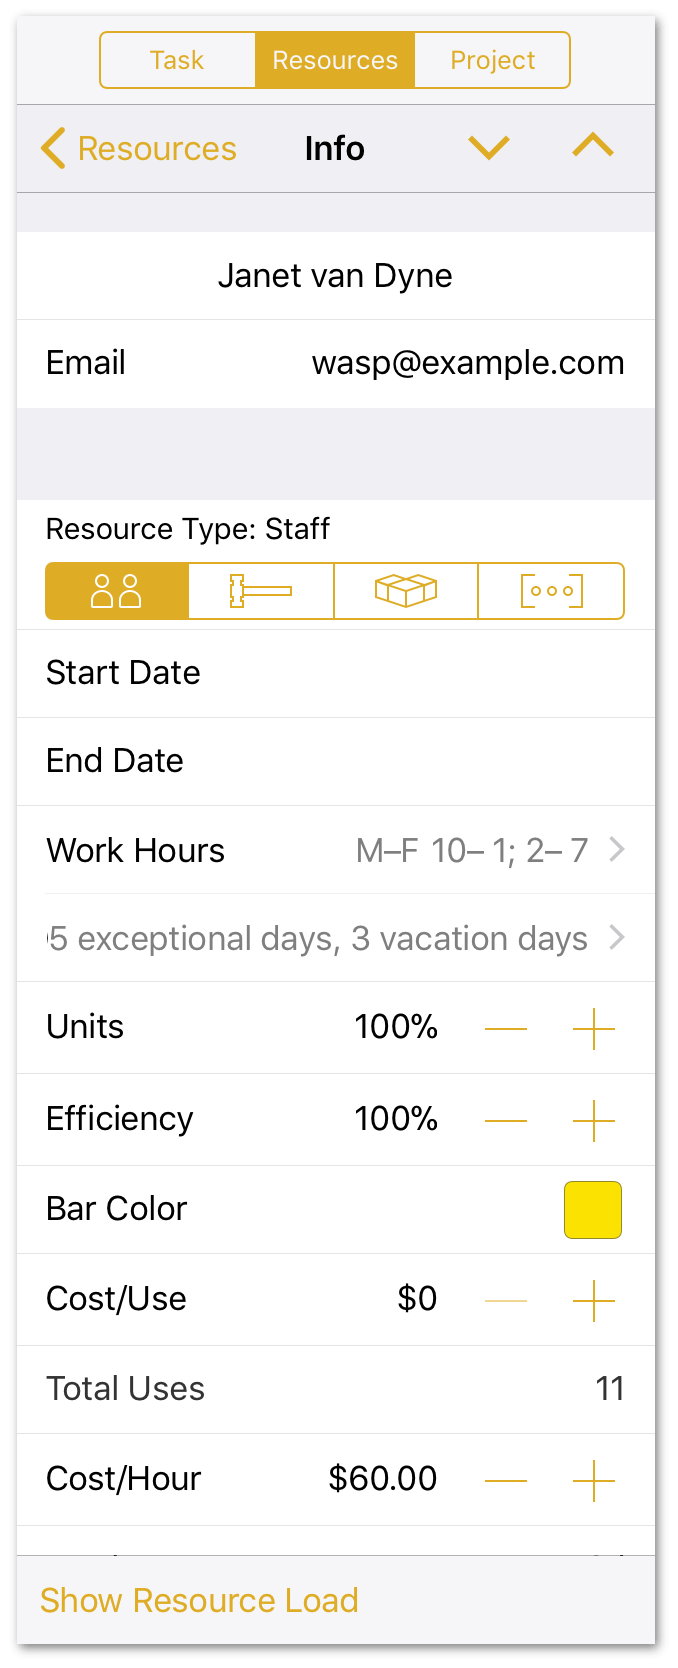 The hourly rate for Janet van Dyne, as set in the Resources inspector